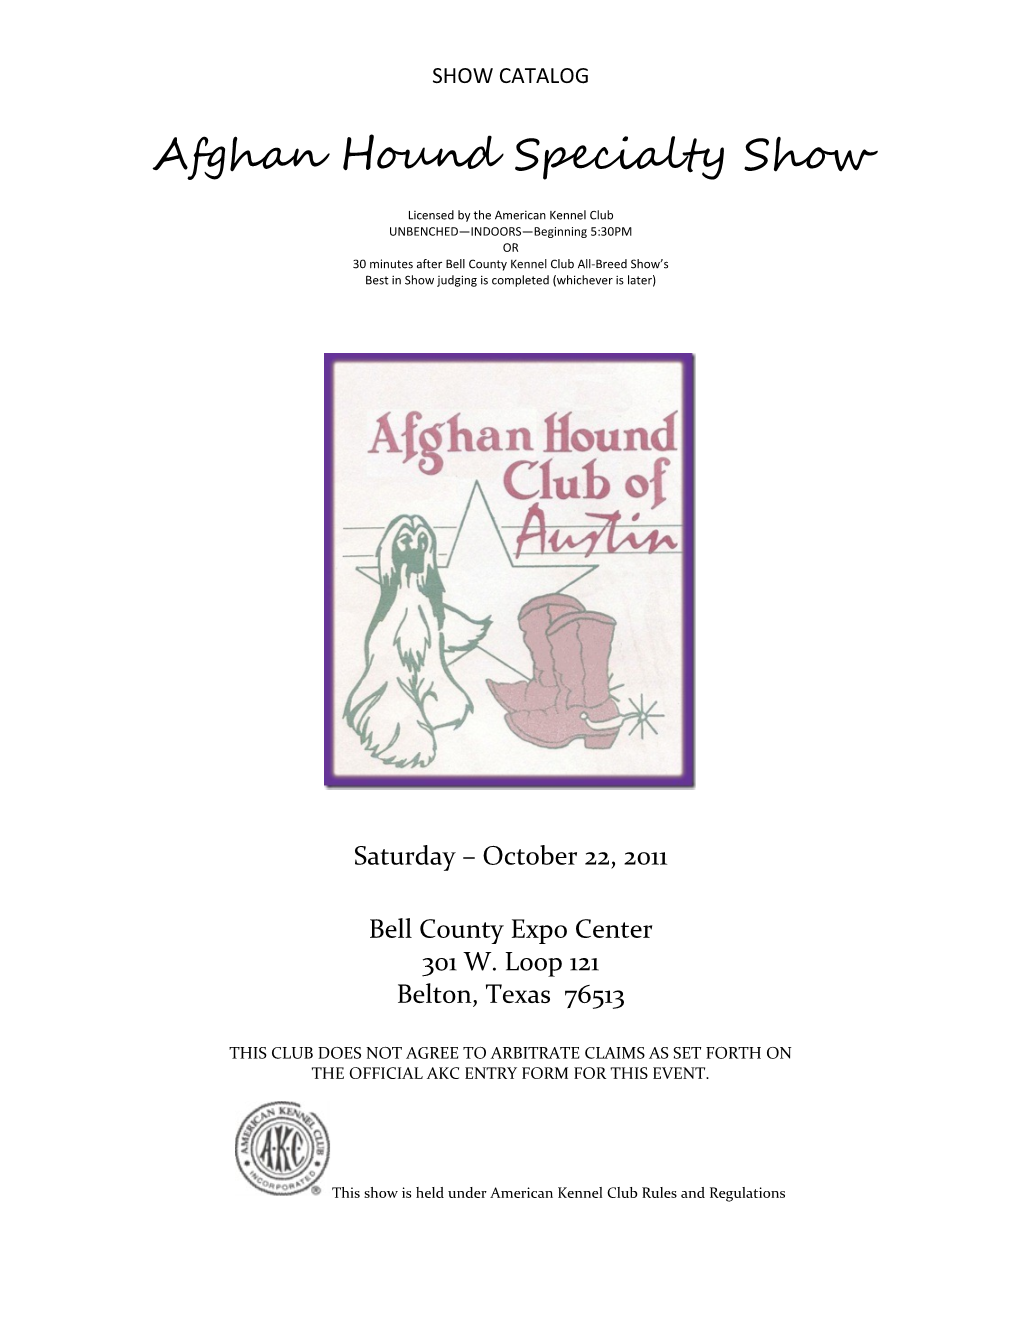 Afghan Hound Specialty Show